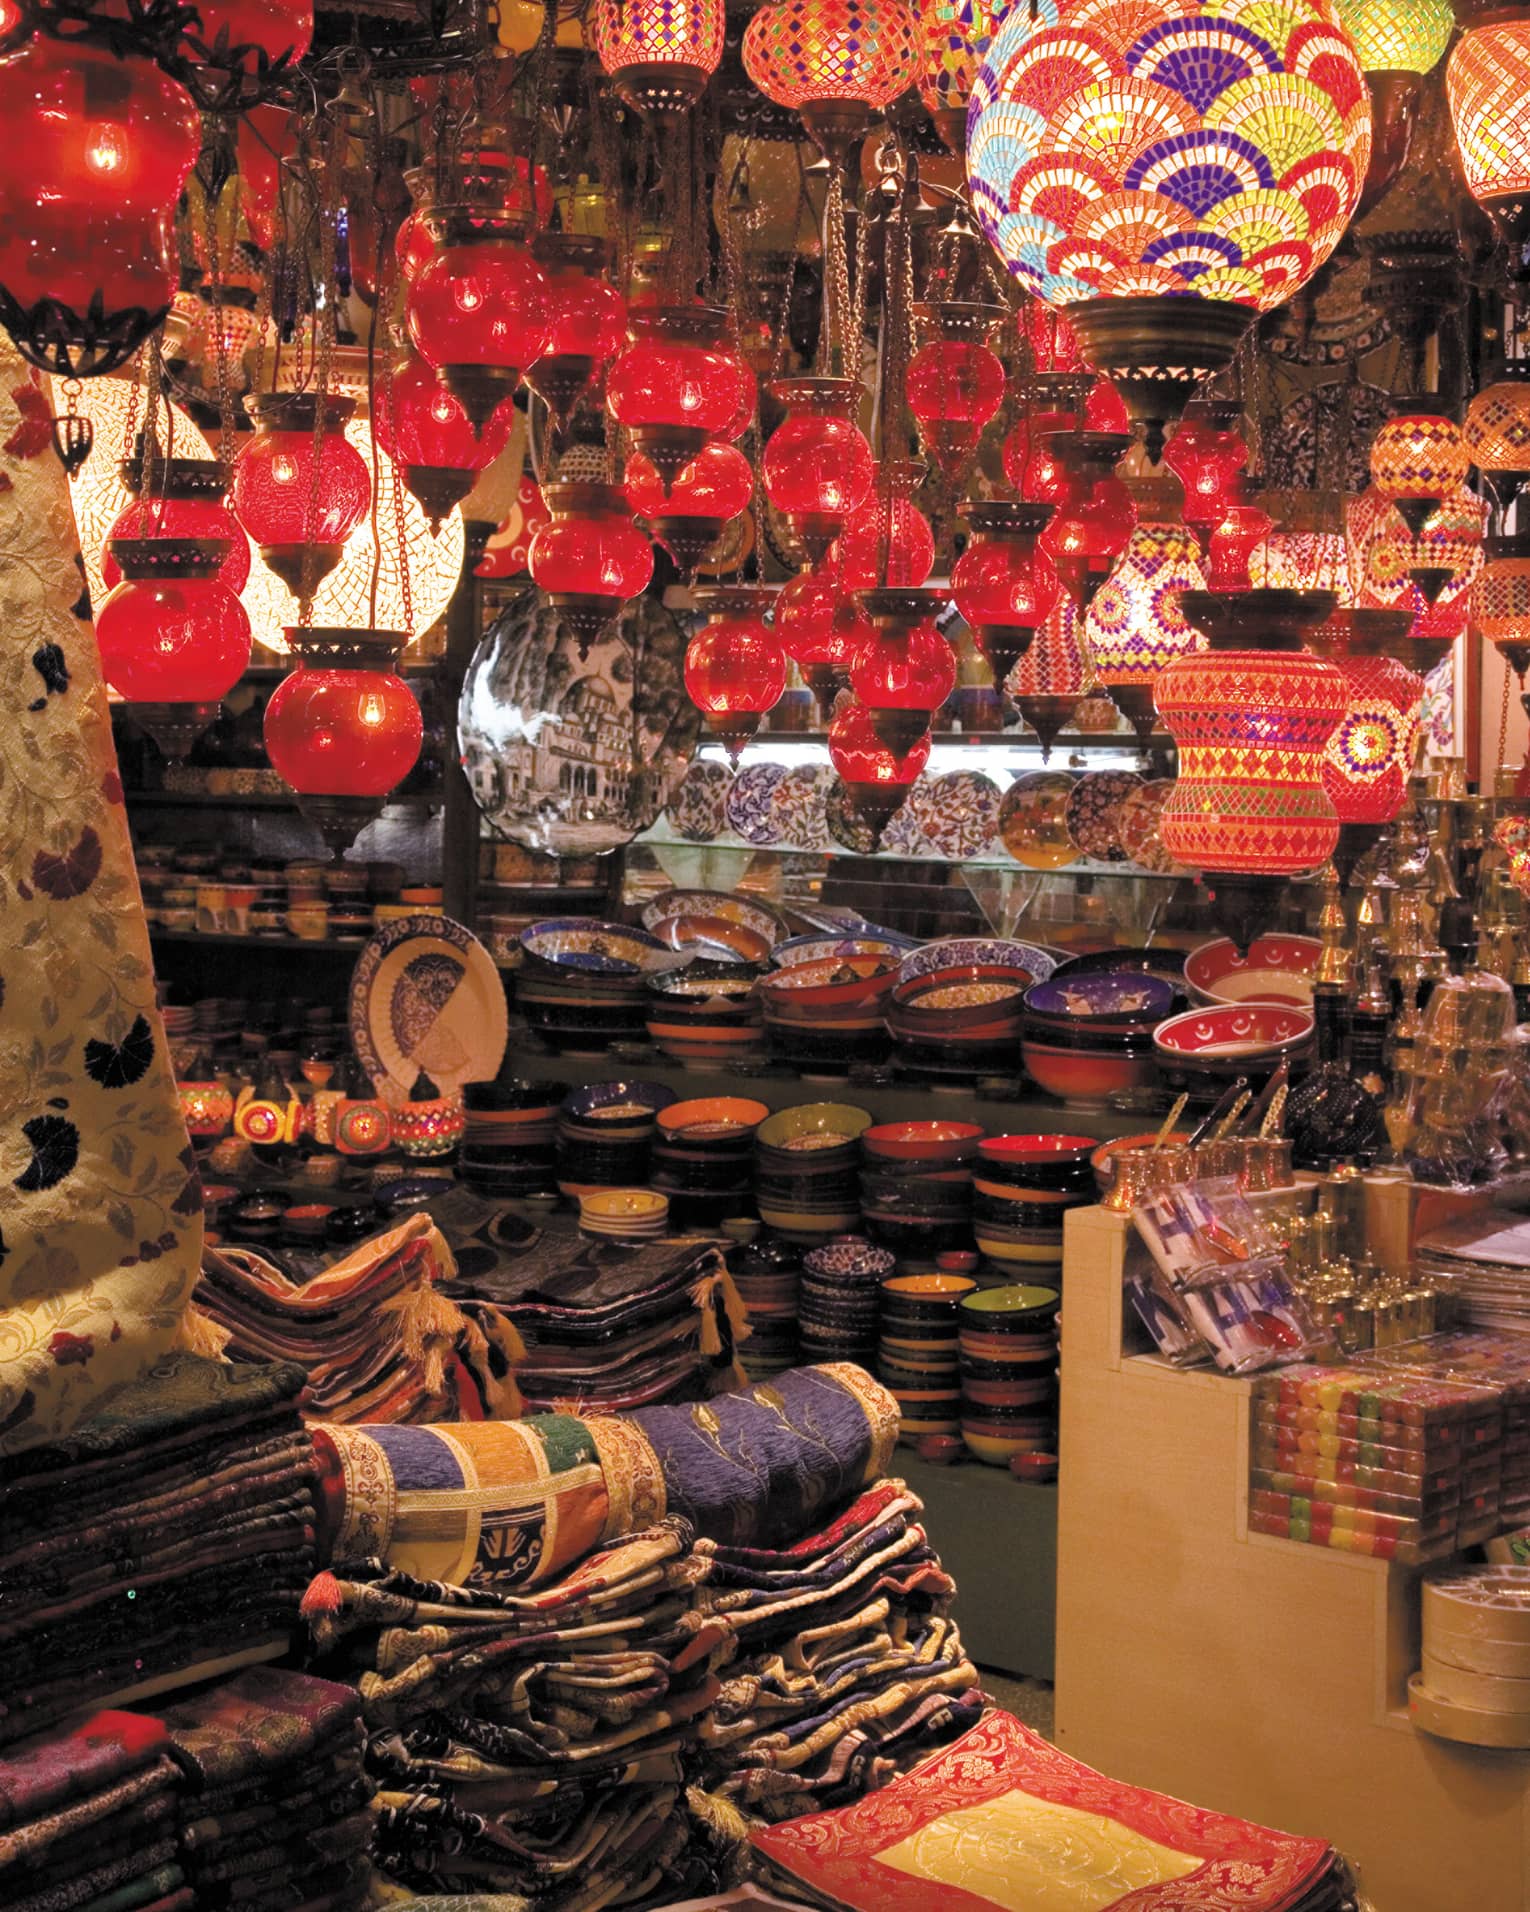 Red lanterns hang over shelves with decorative plates in Grand Bazaar